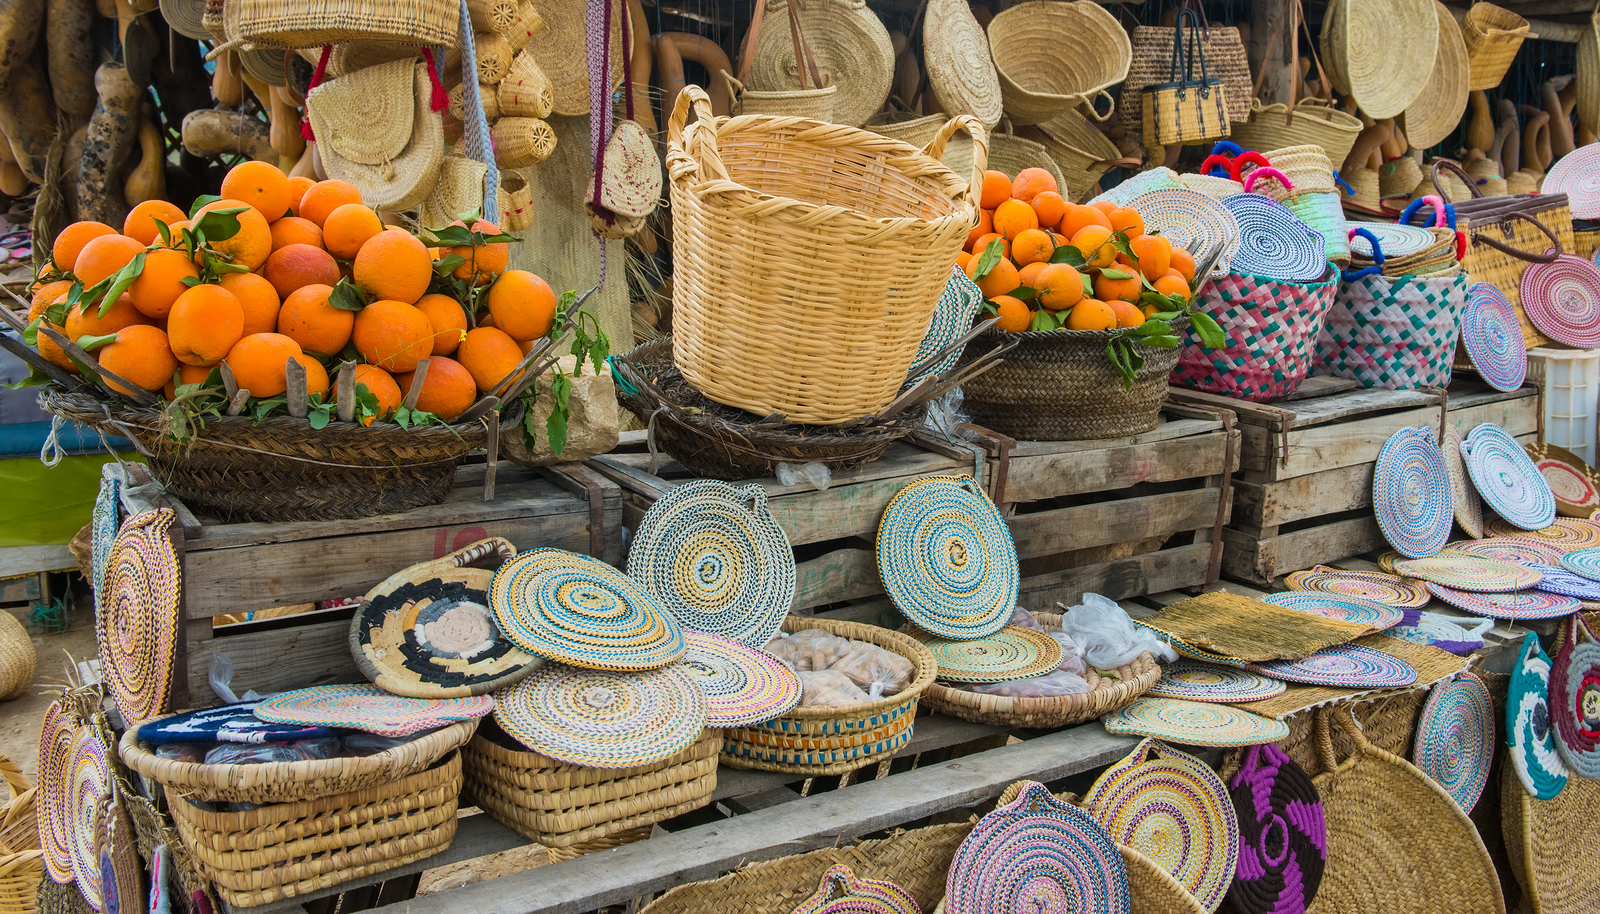 Sustainable Souvenirs: What To Buy and What Not To Buy - Global Heritage  Travel